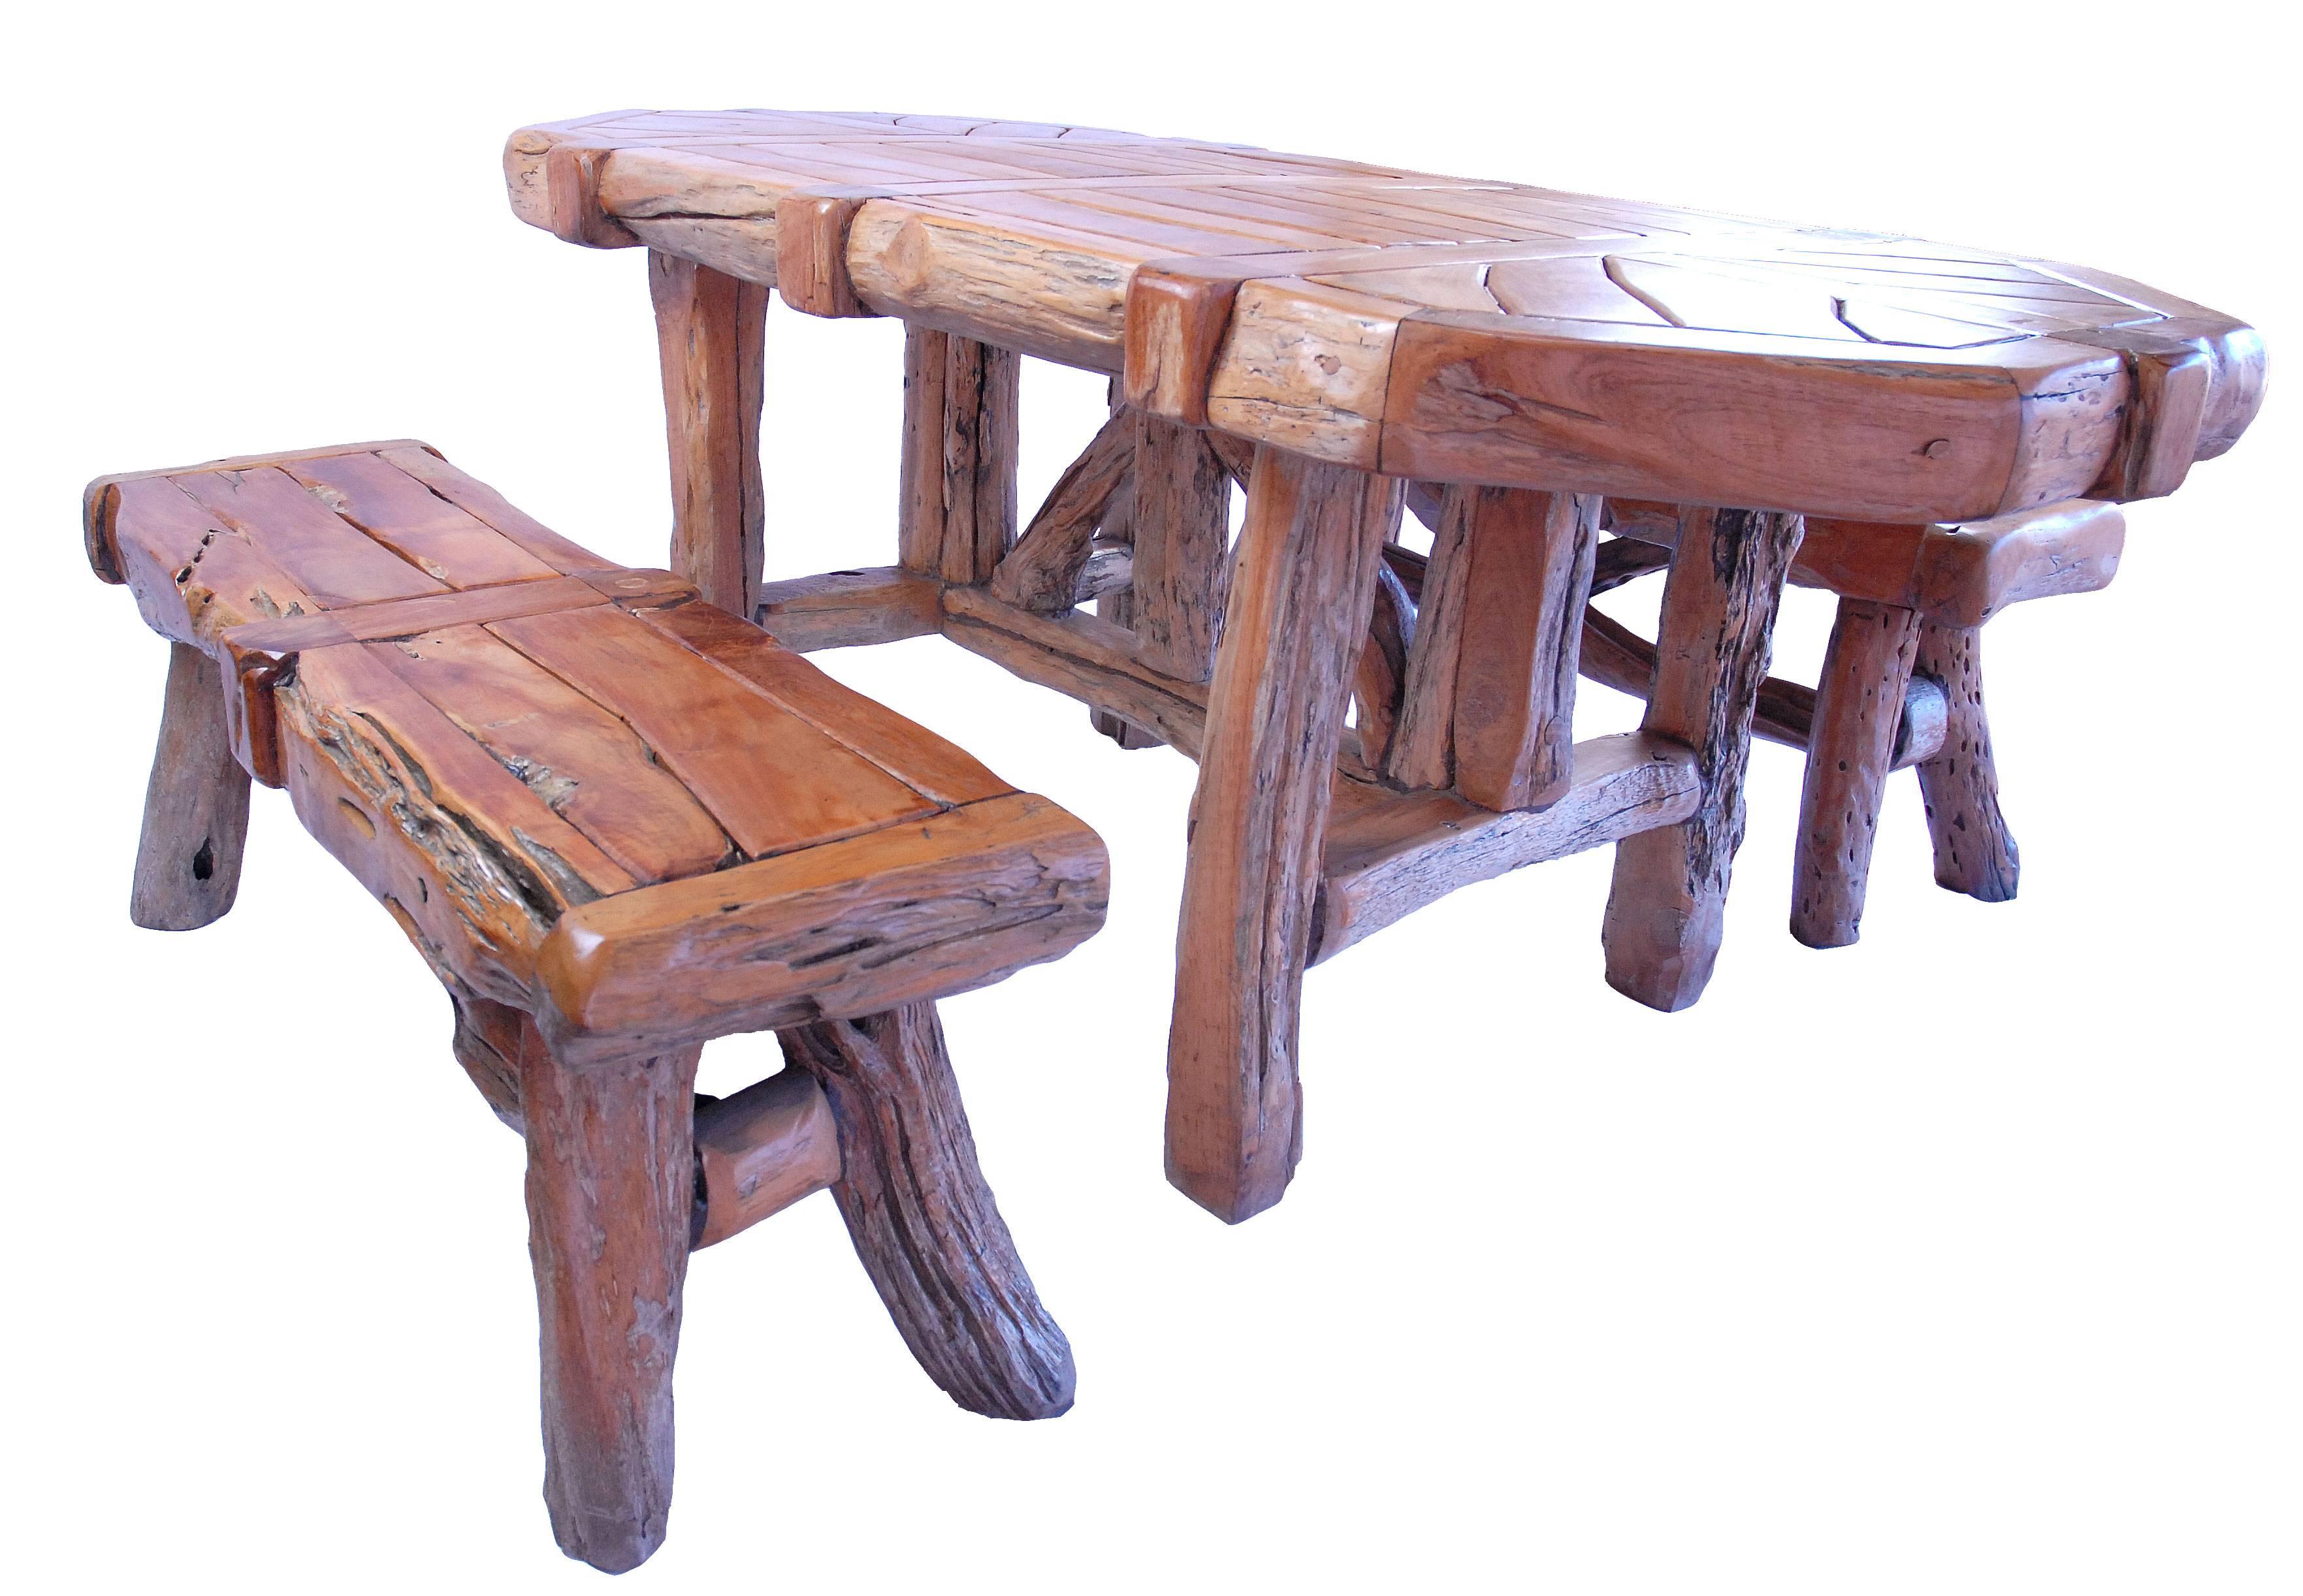 Rustic Teak Dining Table Set with Benches